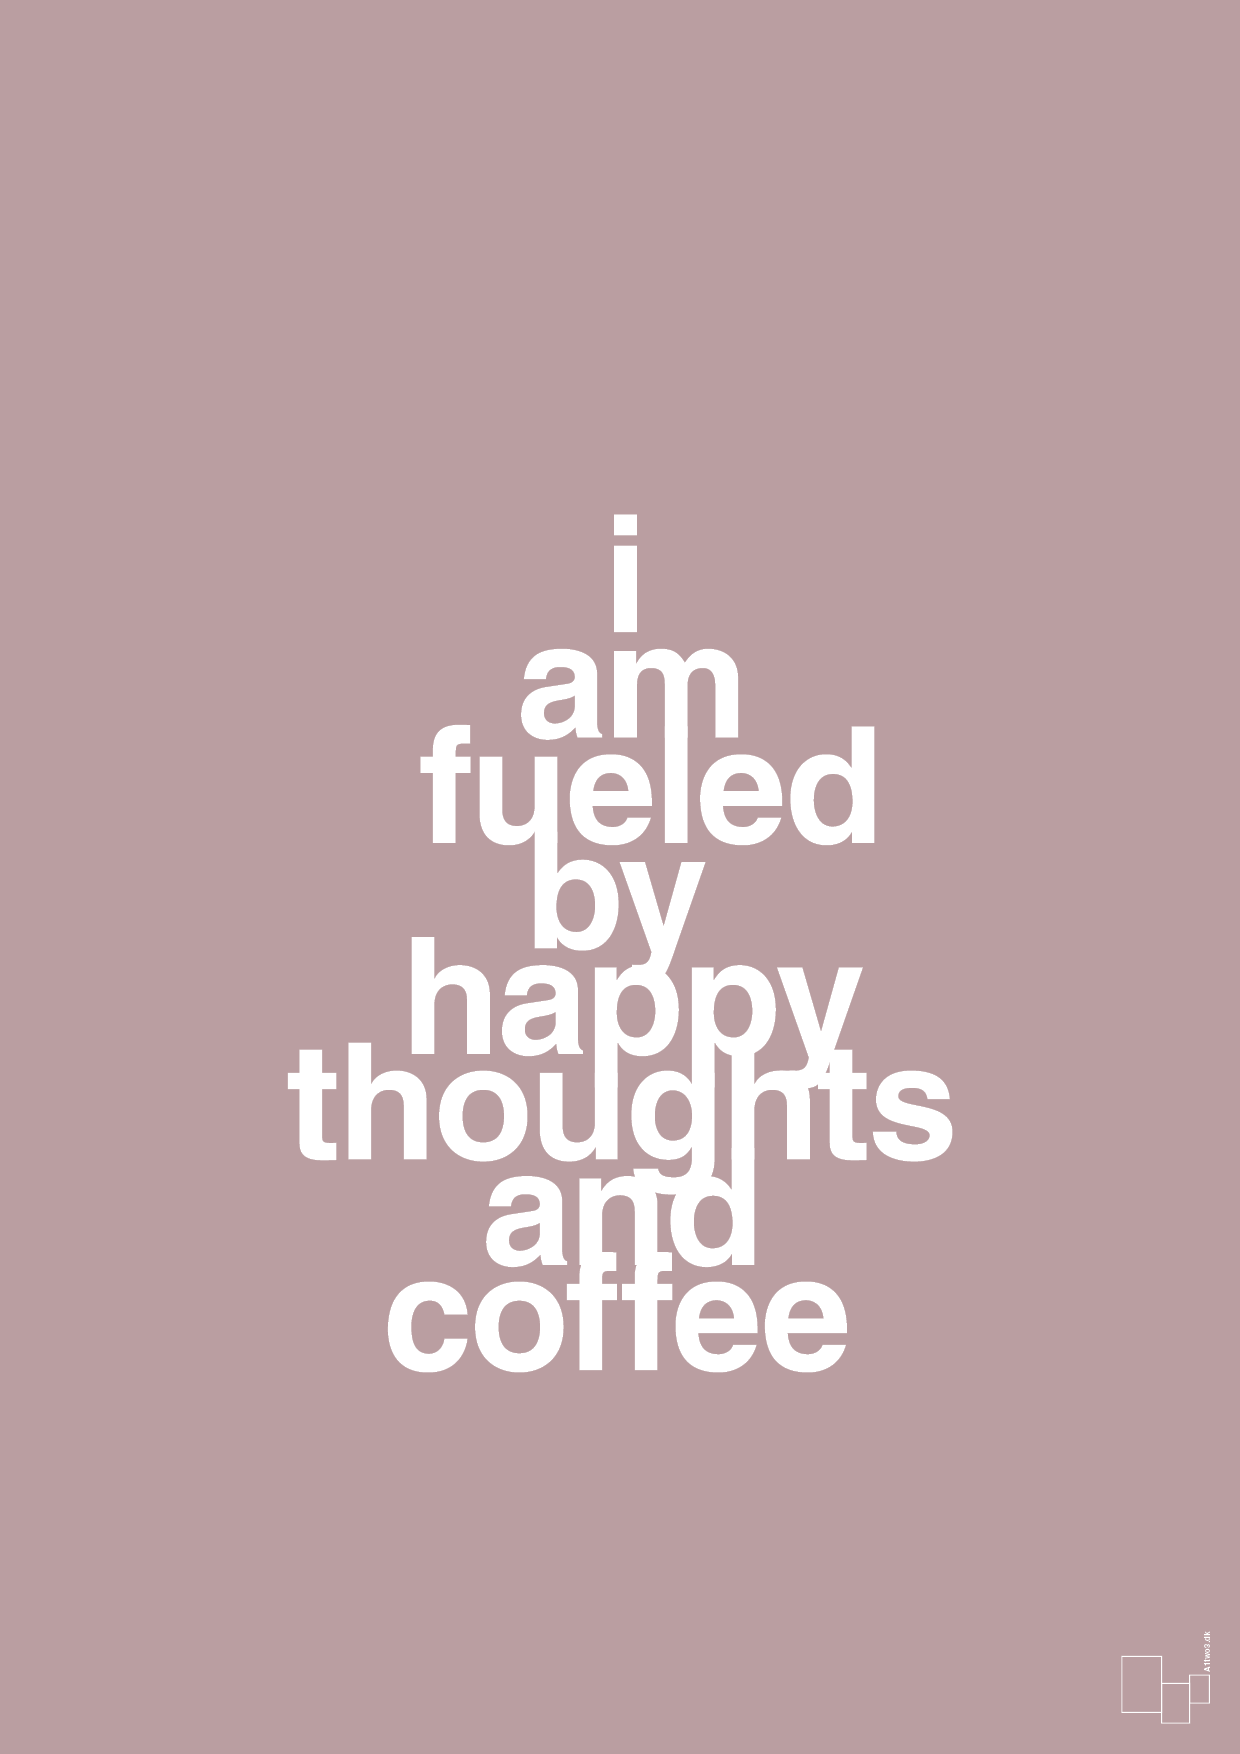 i am fueled by happy thoughts and coffee - Plakat med Mad & Drikke i Light Rose